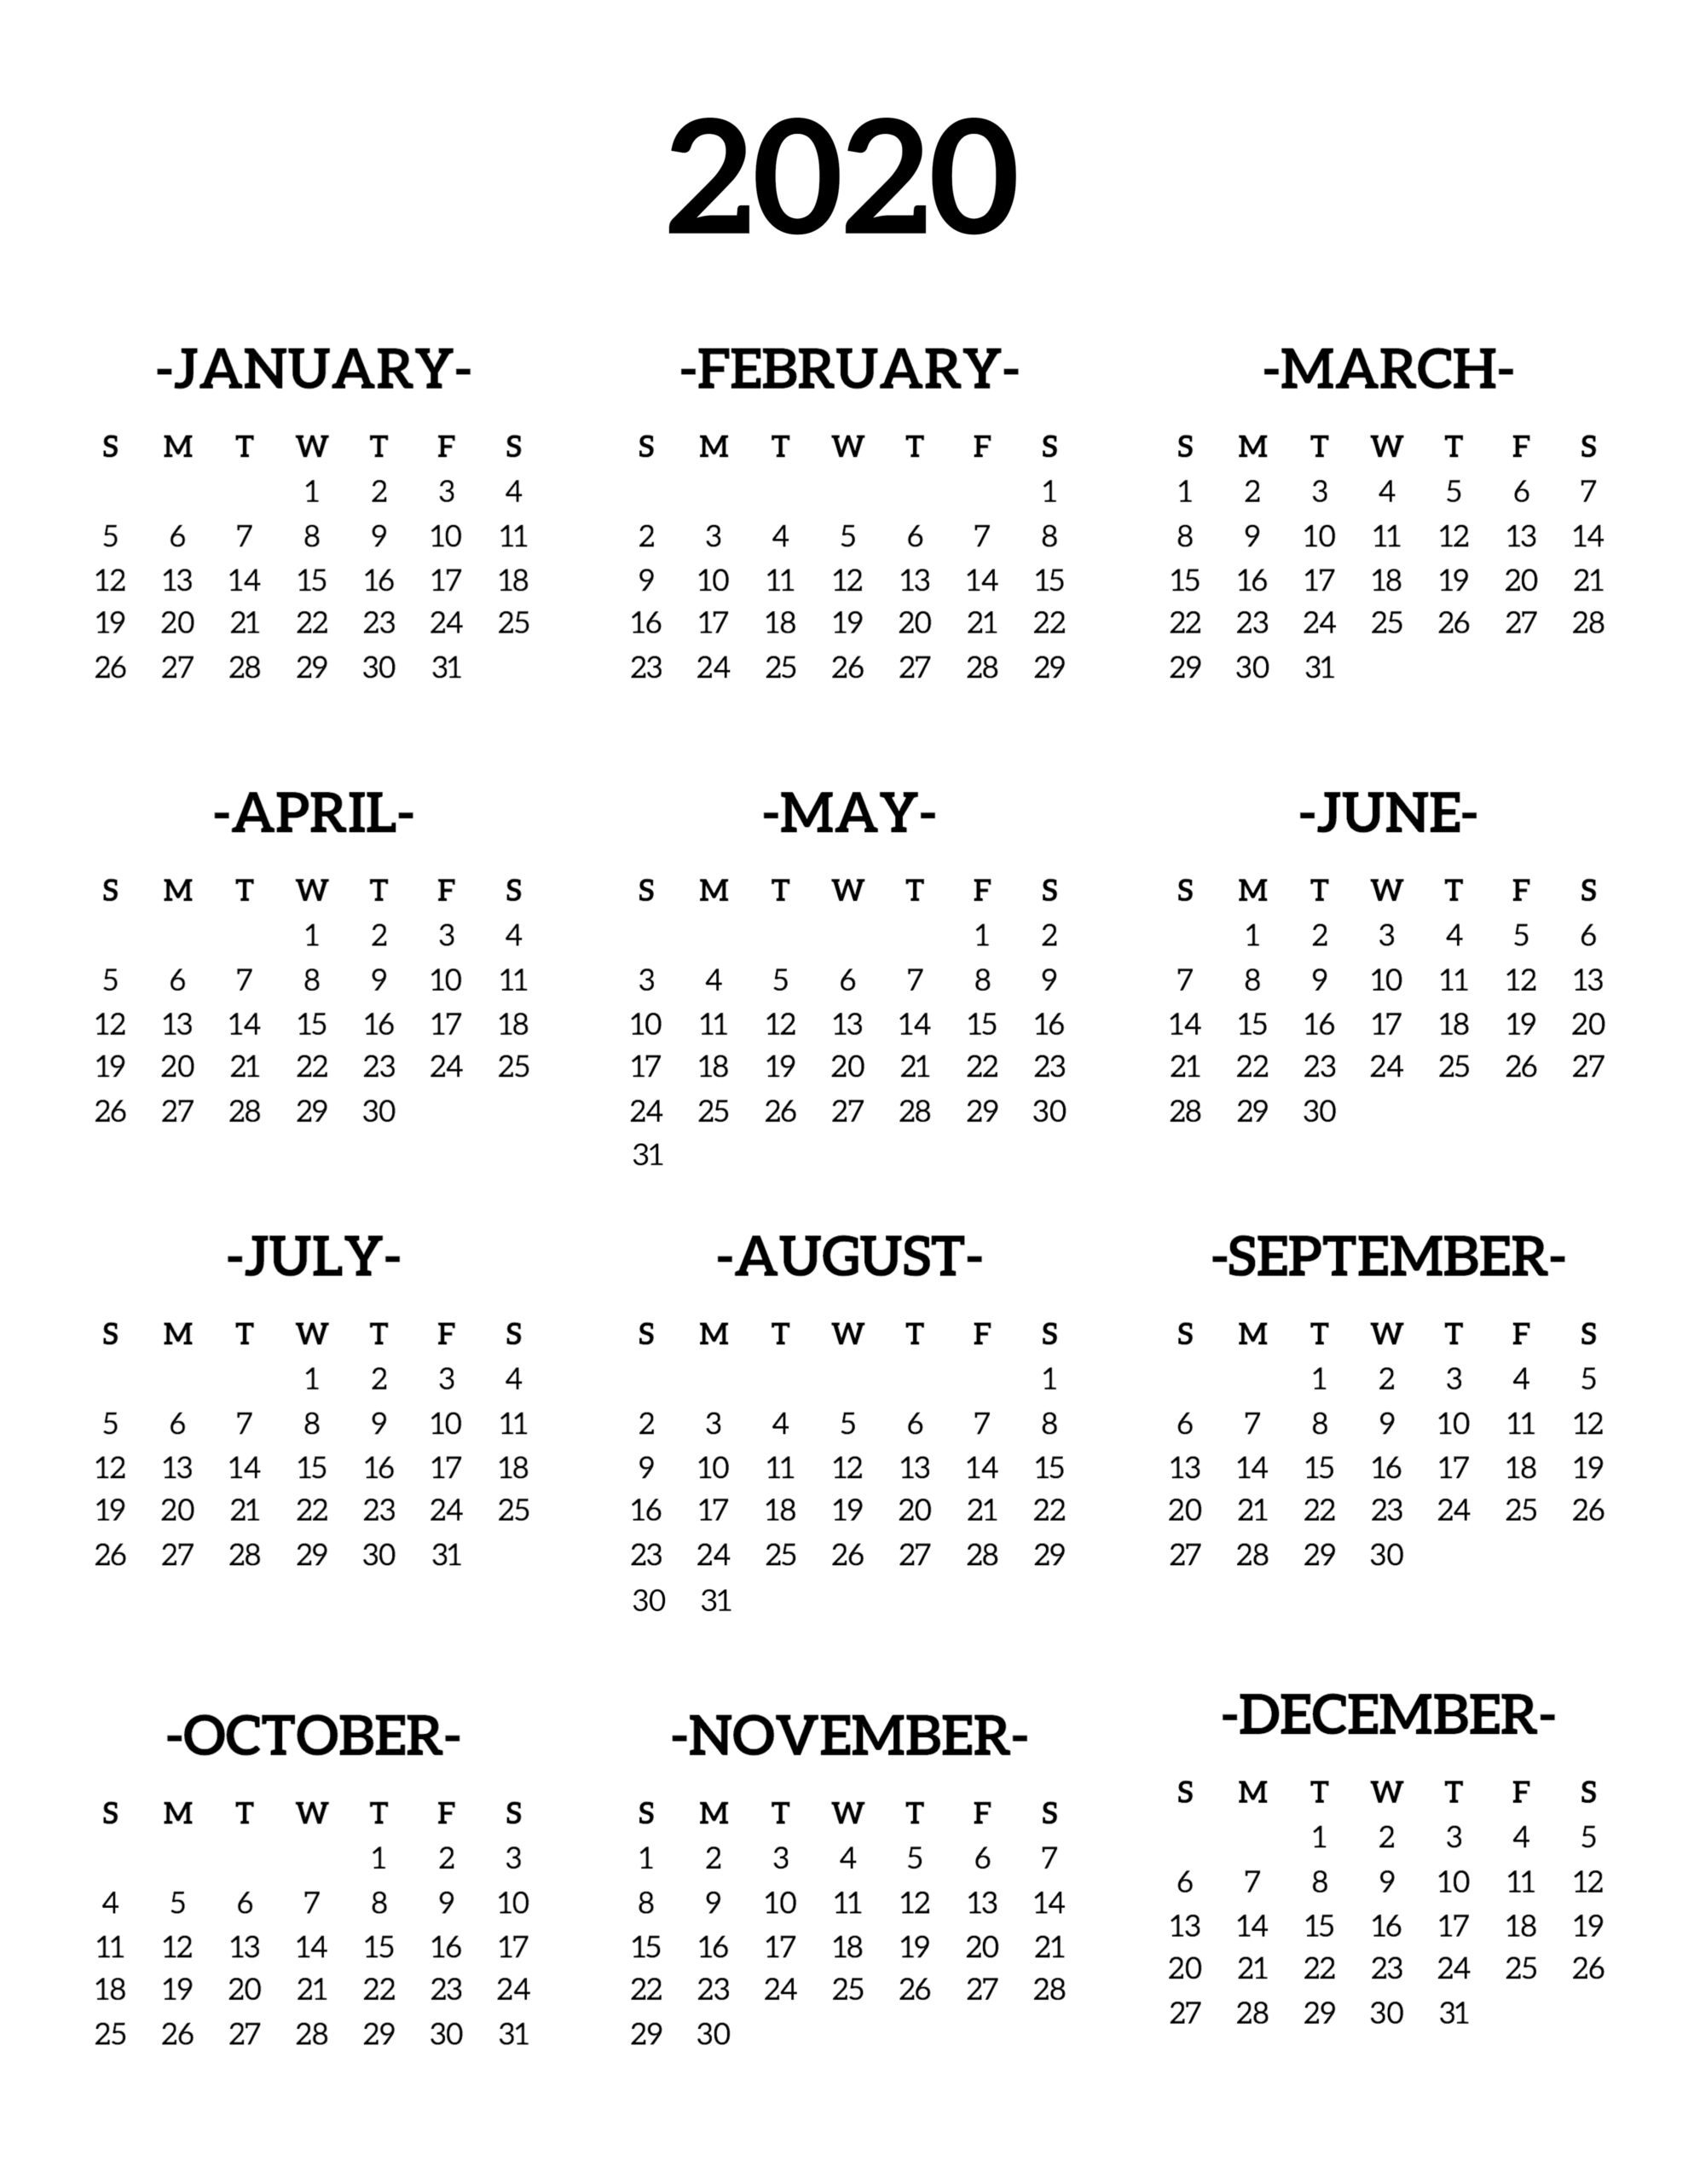 Calendar 2020 Printable One Page - Paper Trail Design in 2020 Printable Calendar Starting With Monday